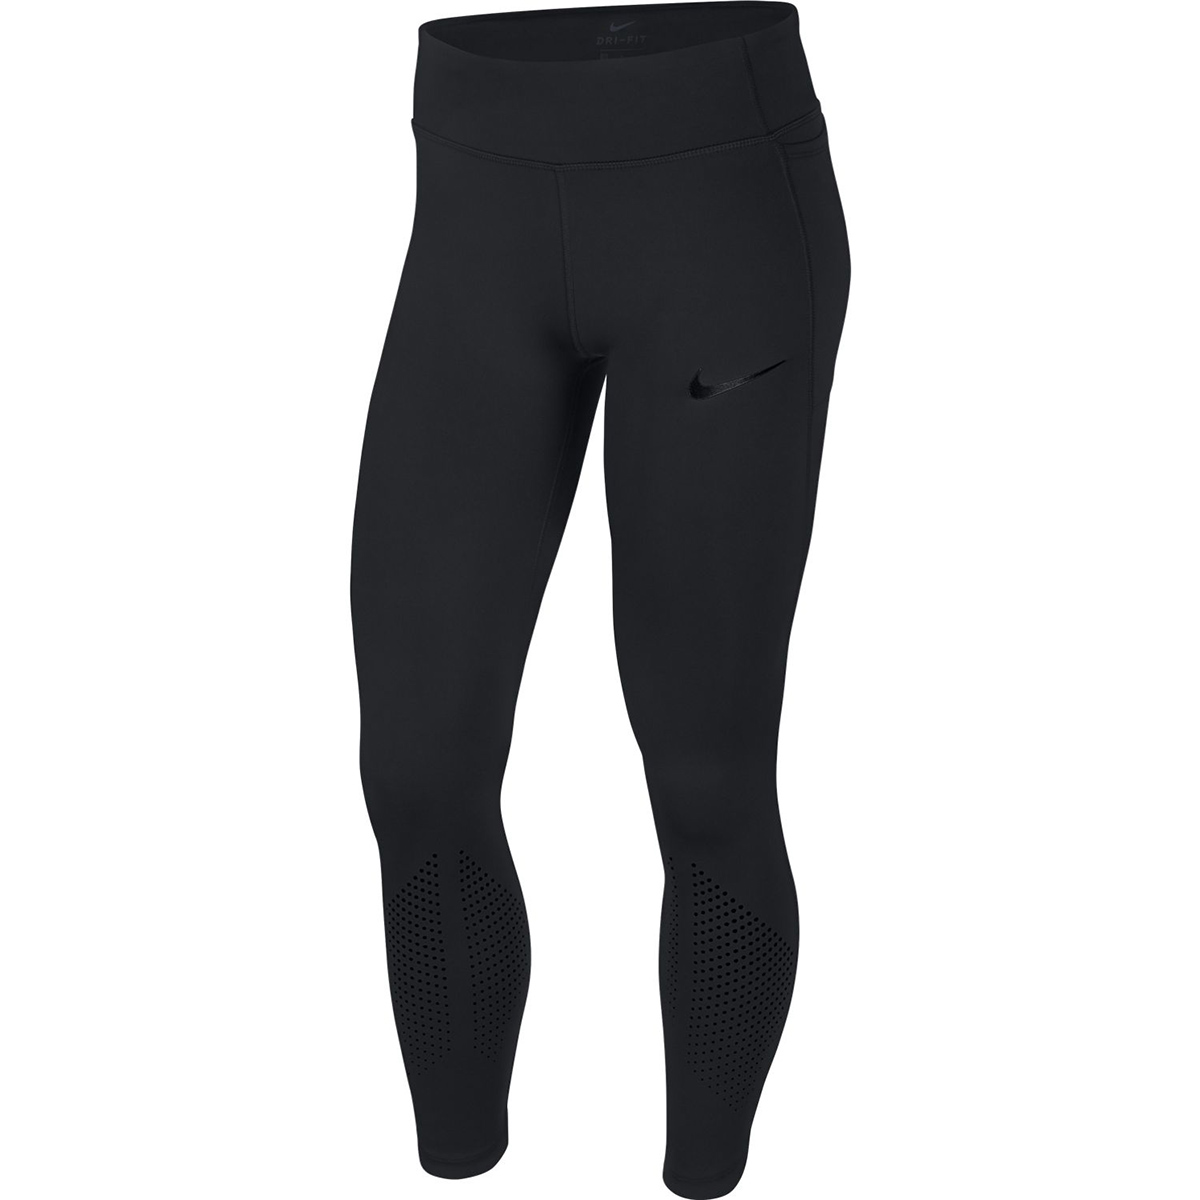 Nike Epic Lux Tight, , large image number null